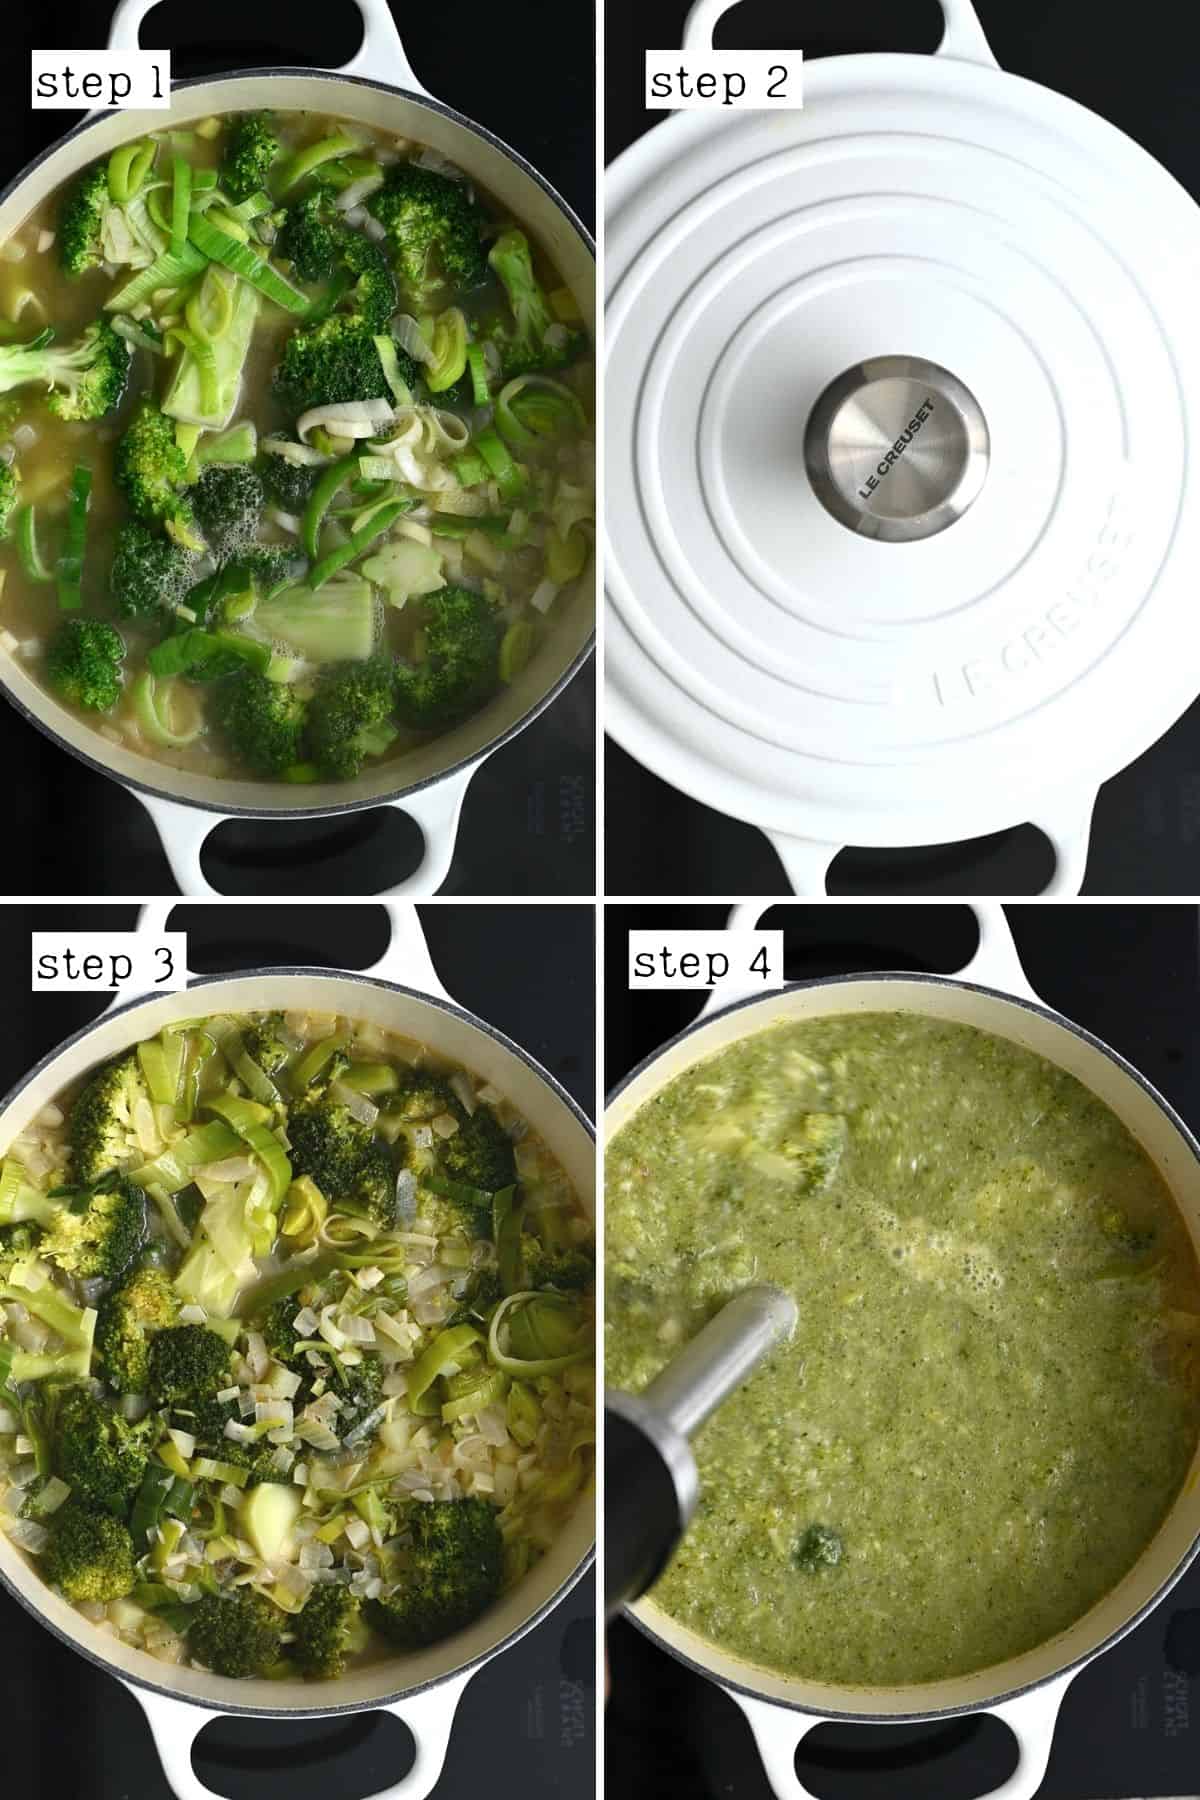 Steps for cooking broccoli soup